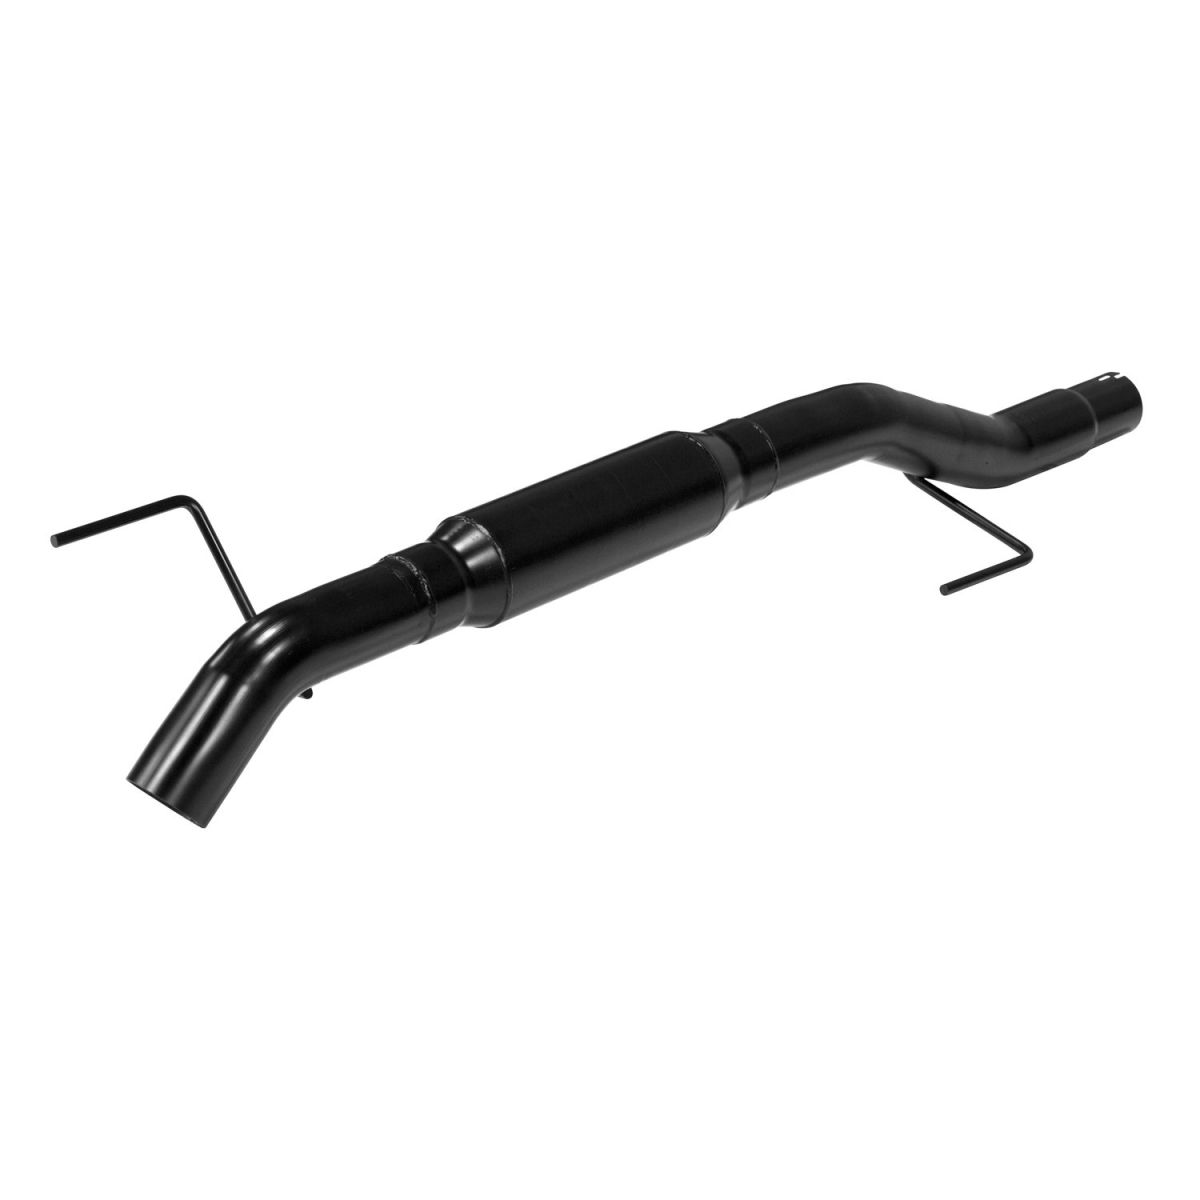 Flowmaster - Flowmaster Outlaw Series Cat-Back Exhaust System For 09-14 Ford F-150 Trucks